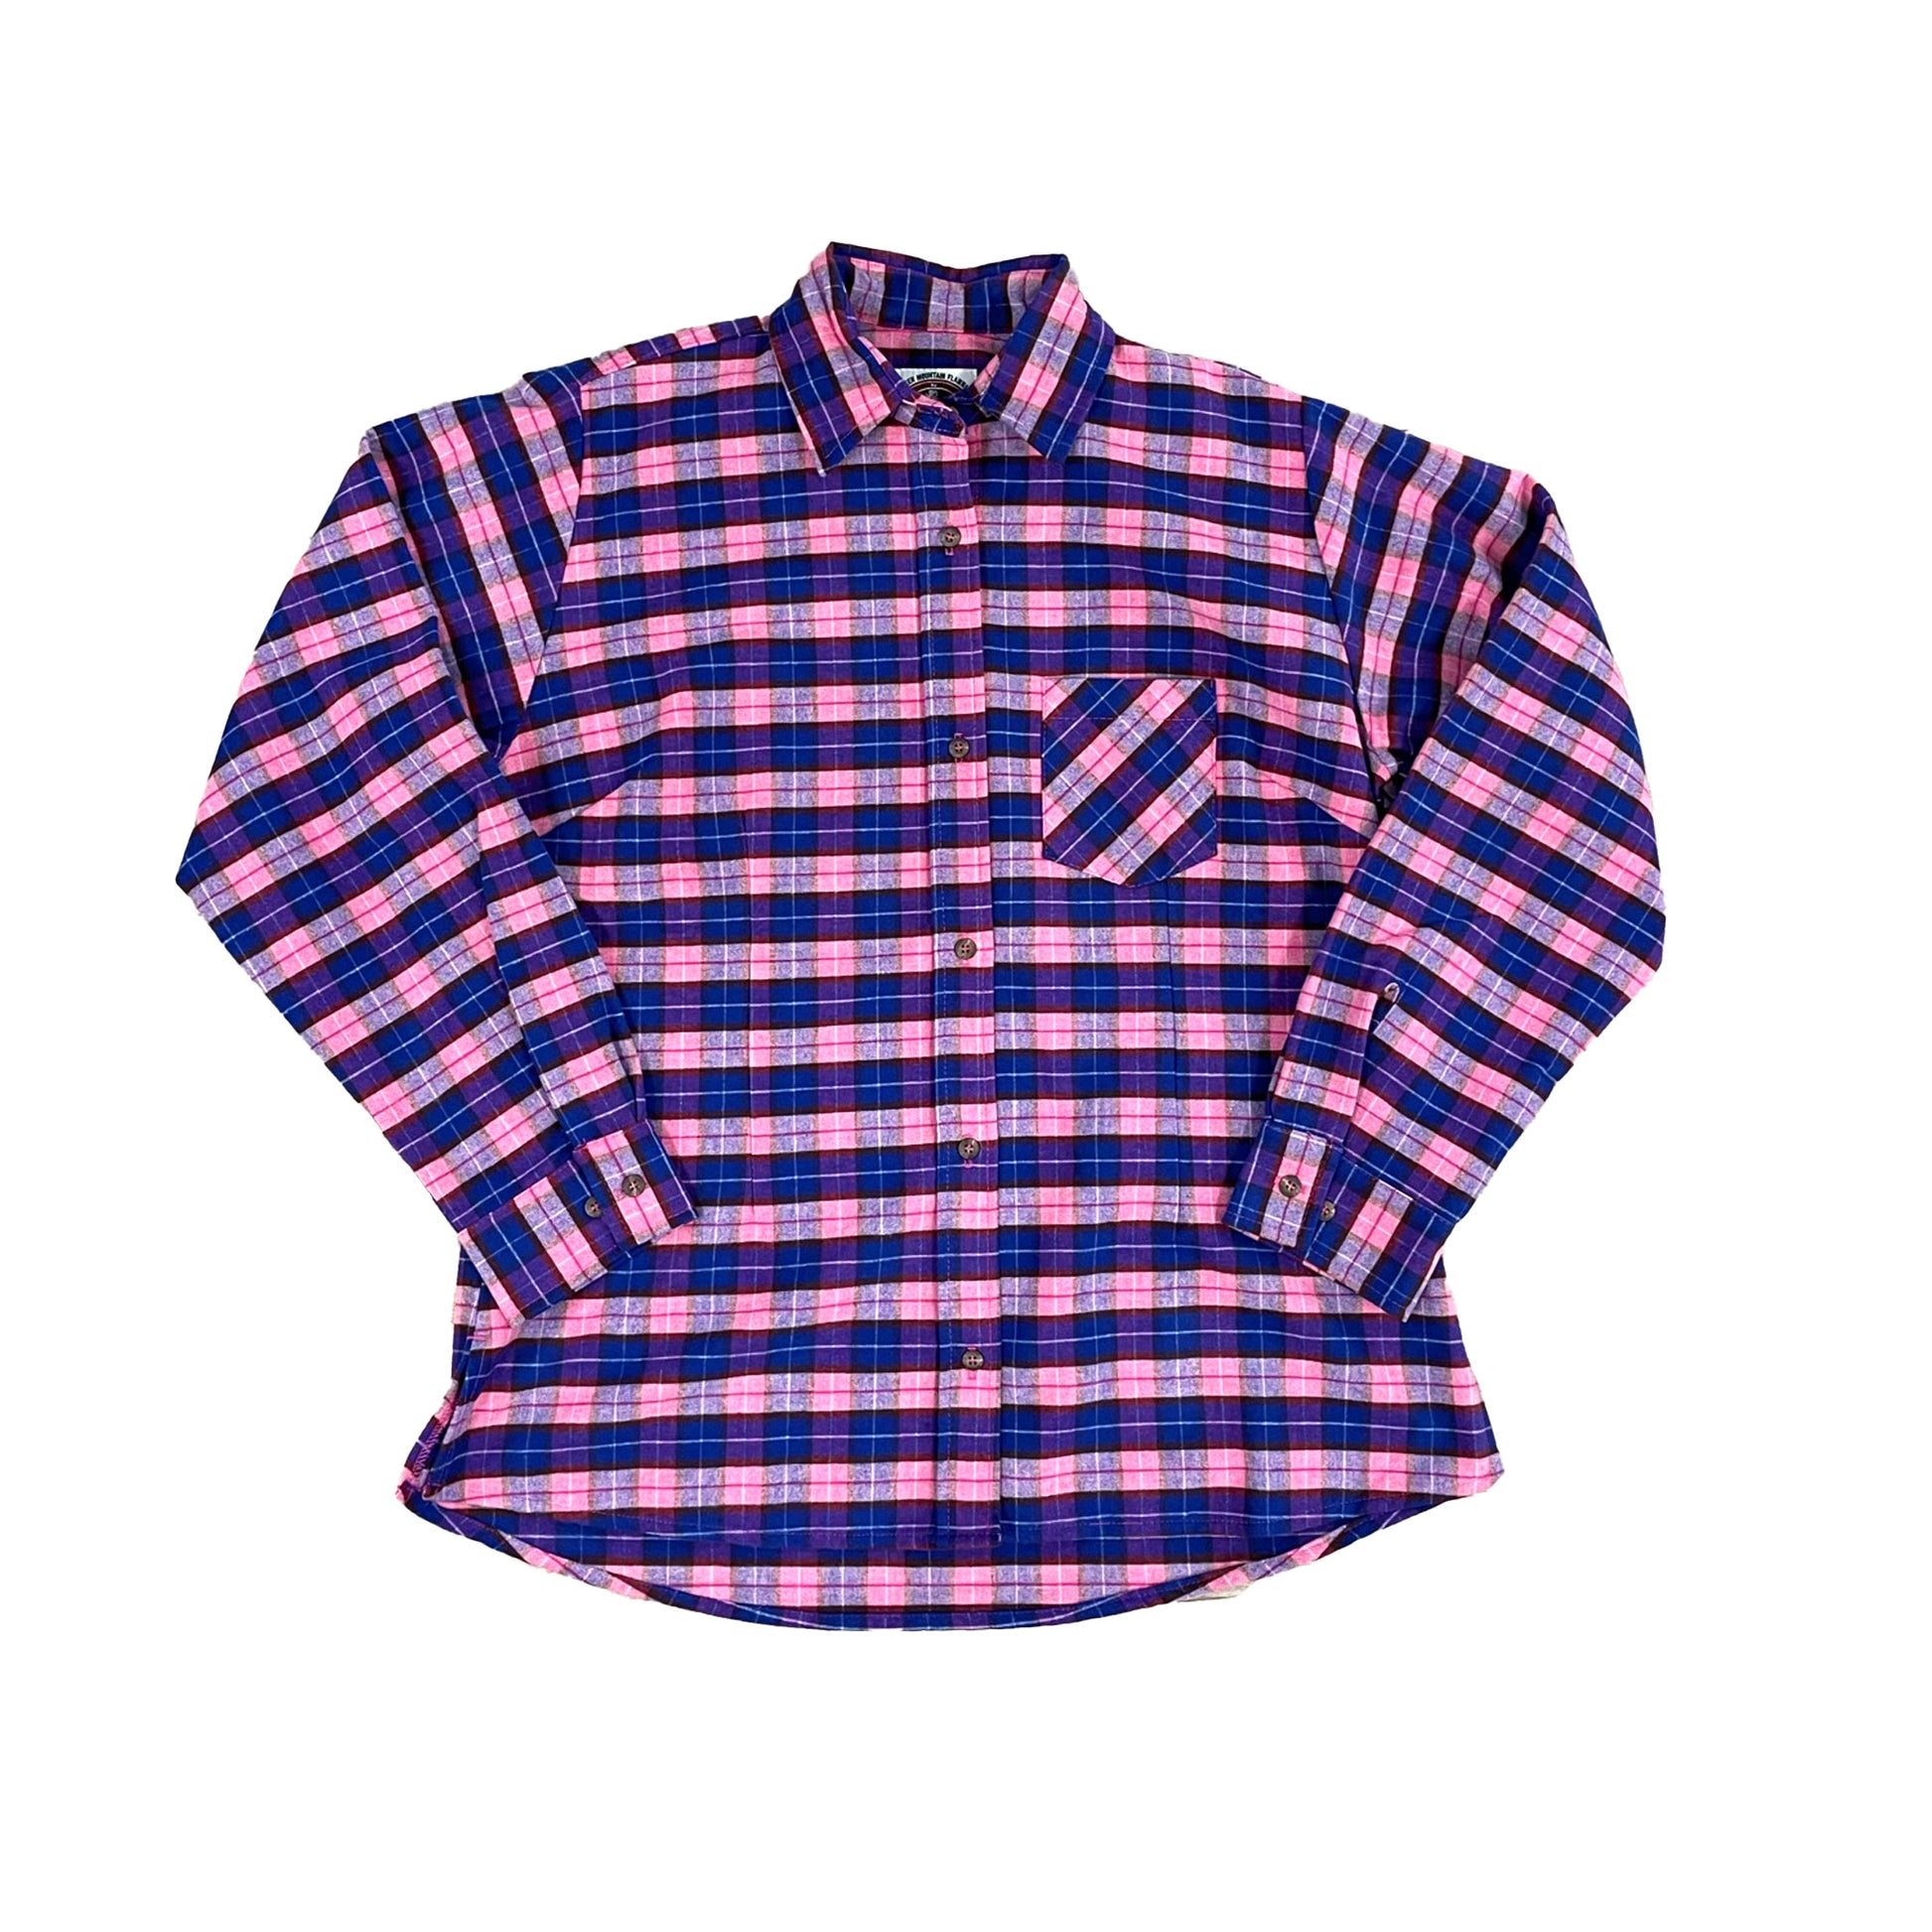 Women's flannel pink and purple plaid button down shirt